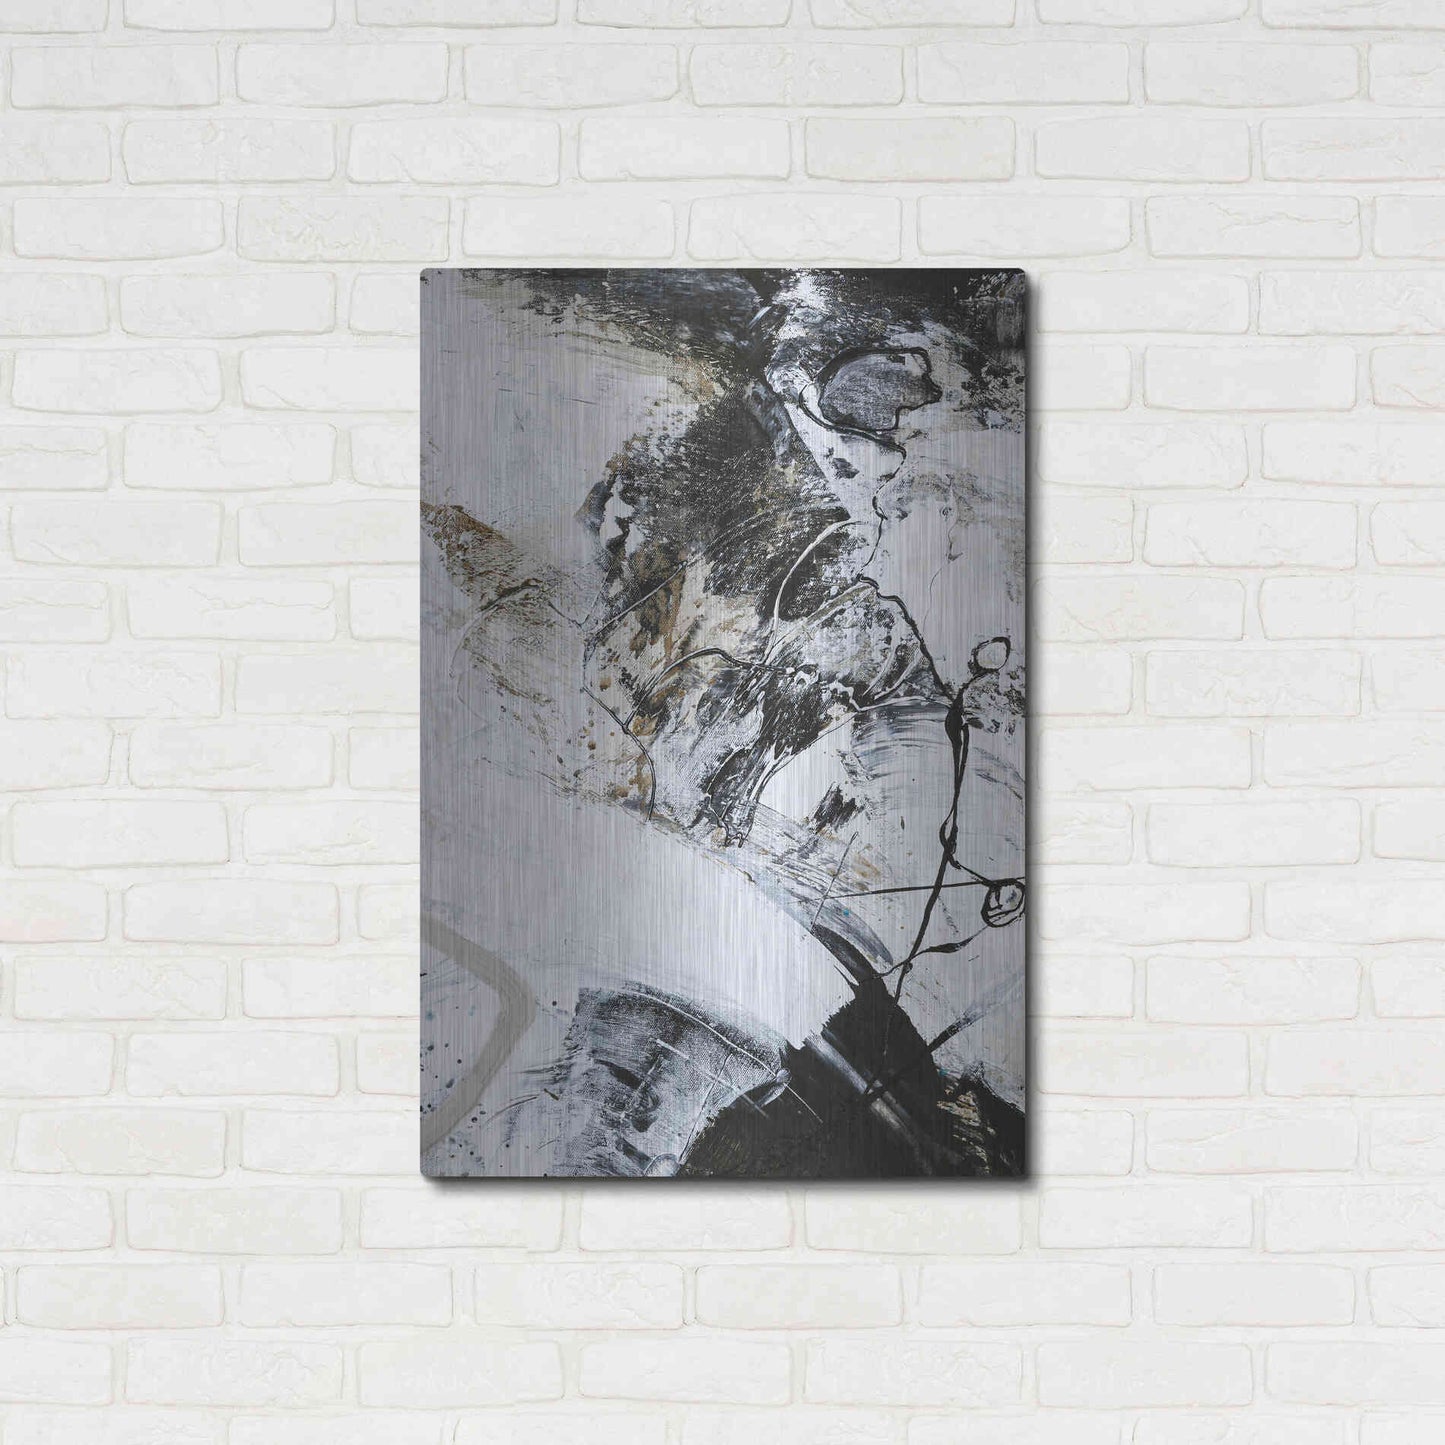 Luxe Metal Art 'Black and White 1' by Design Fabrikken, Metal Wall Art,24x36